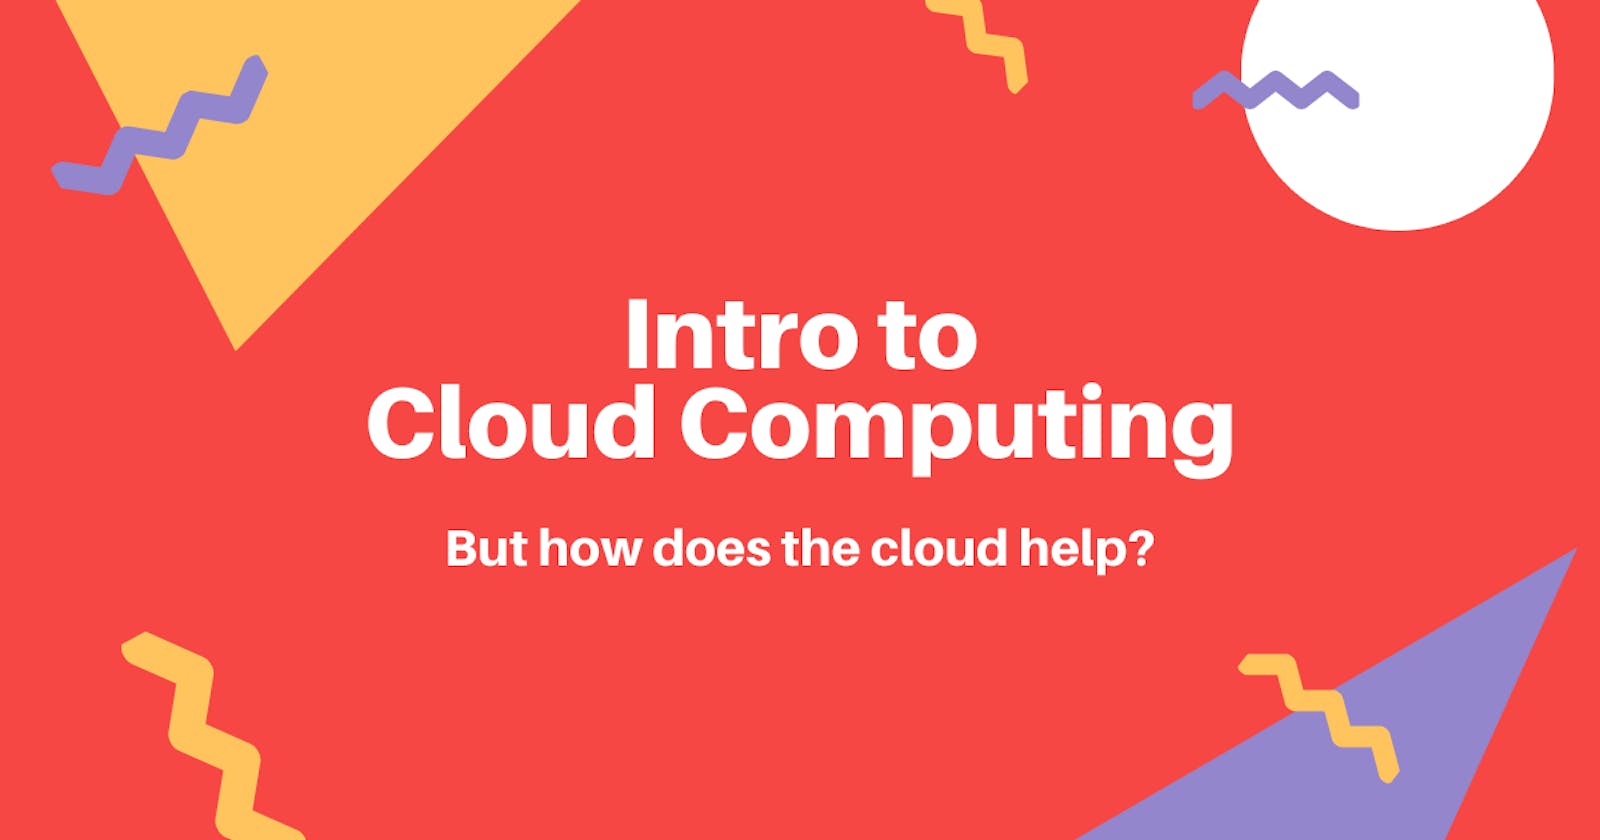 But how does the cloud help? (Part 2 of 2)